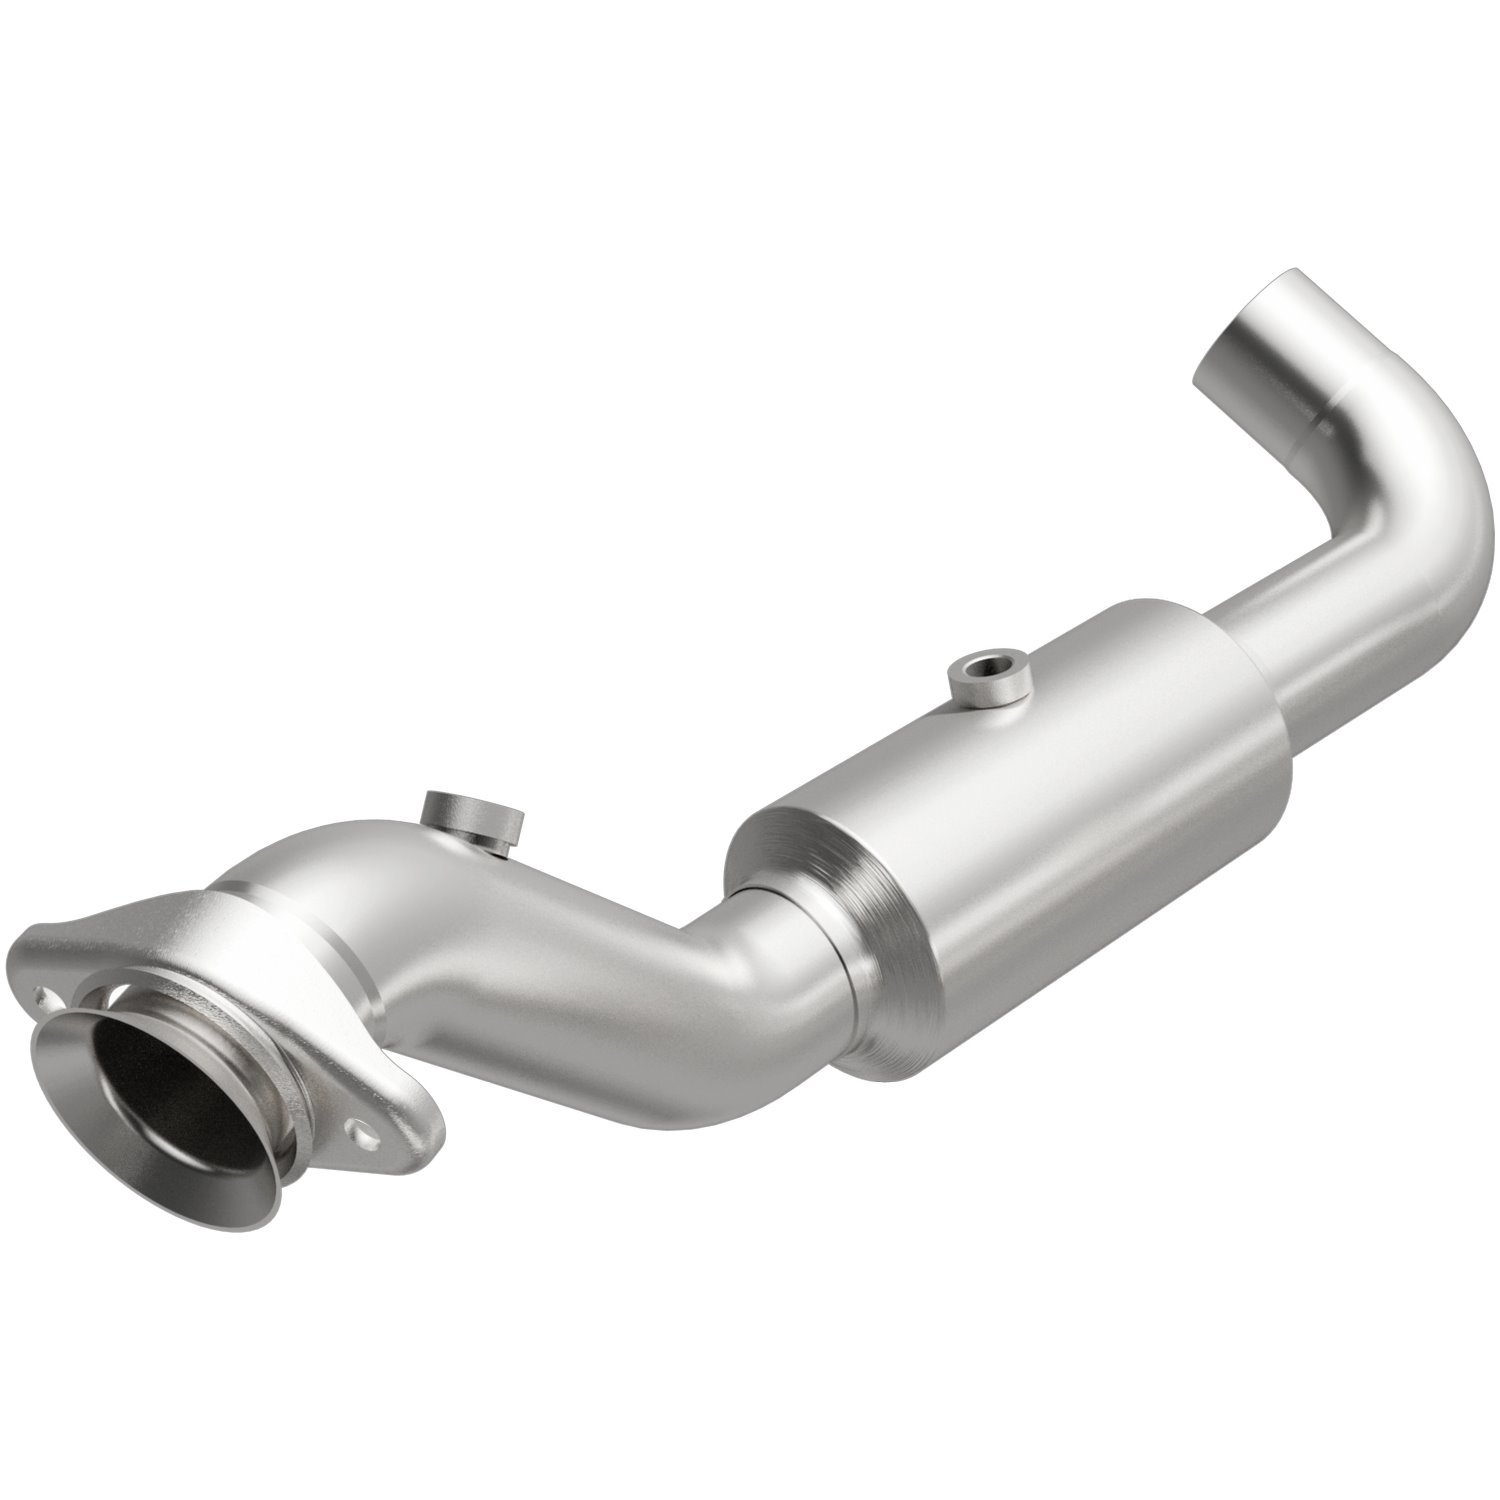 2015-2020 Ford F-150 OEM Grade Federal / EPA Compliant Direct-Fit Catalytic Converter 21-465